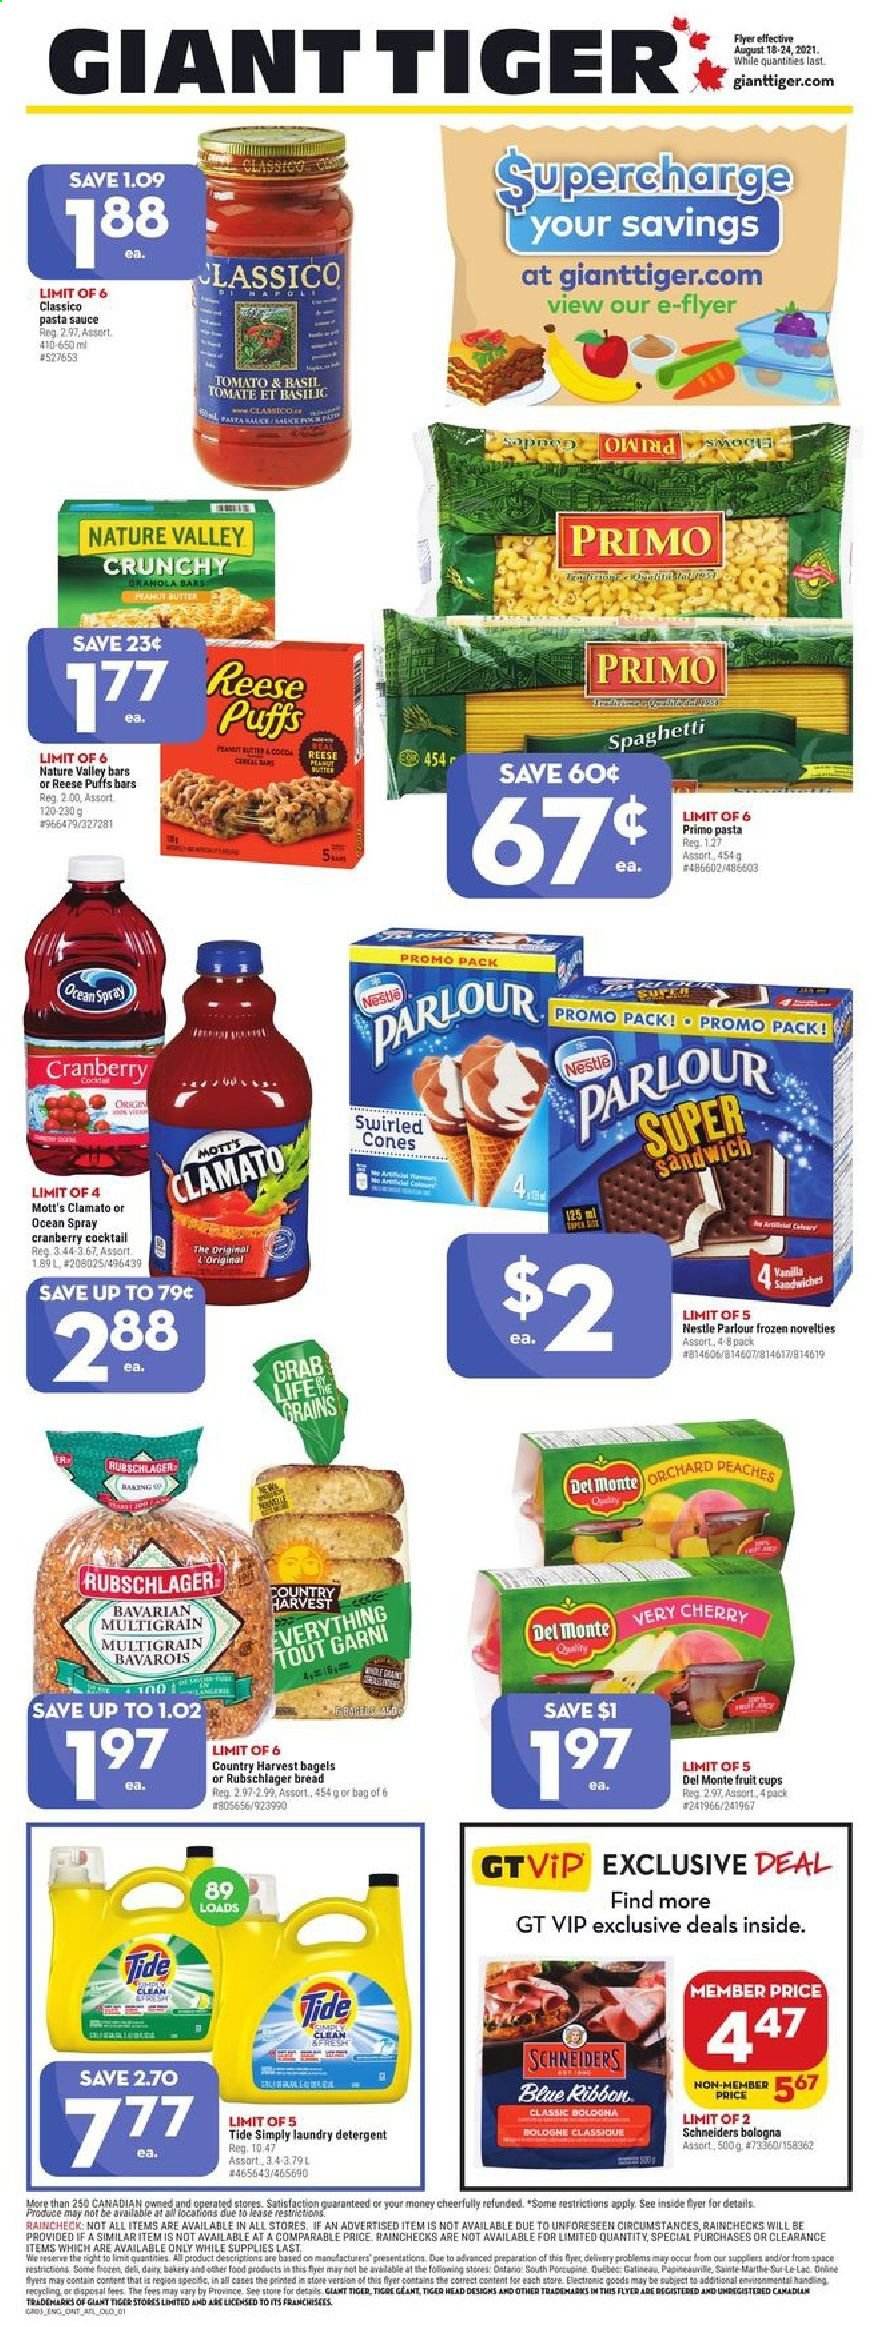 thumbnail - Giant Tiger Flyer - August 18, 2021 - August 24, 2021 - Sales products - bagels, bread, Blue Ribbon, puffs, cherries, fruit cup, peaches, Mott's, spaghetti, pasta sauce, sandwich, sauce, butter, Country Harvest, Nature Valley, Classico, Clamato, Tide, laundry detergent, Nestlé. Page 1.